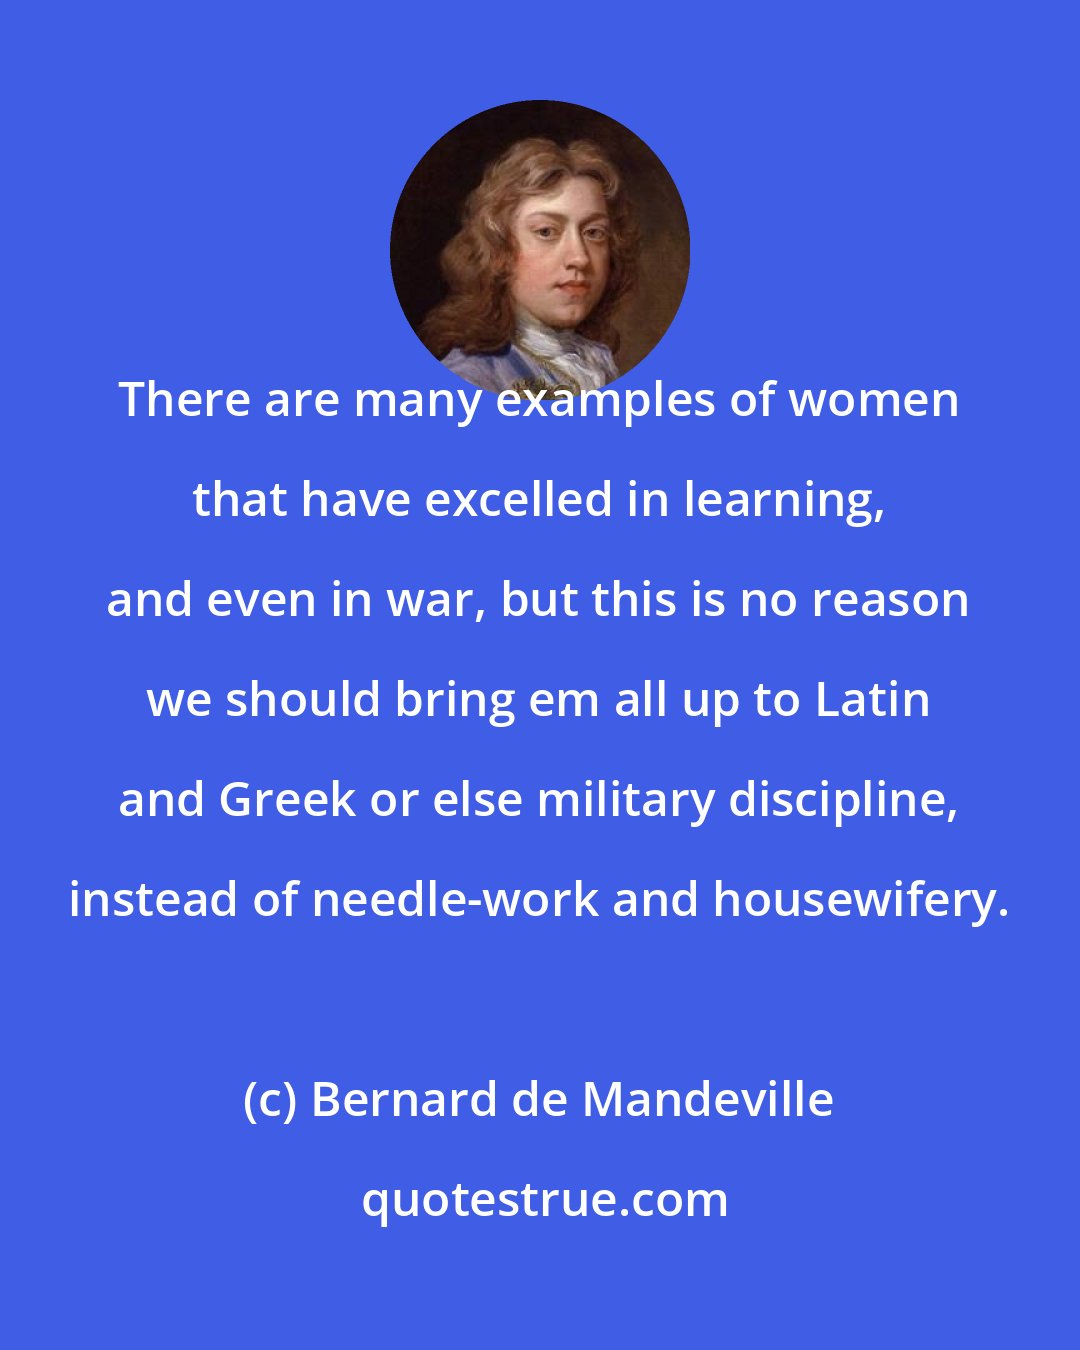 Bernard de Mandeville: There are many examples of women that have excelled in learning, and even in war, but this is no reason we should bring em all up to Latin and Greek or else military discipline, instead of needle-work and housewifery.